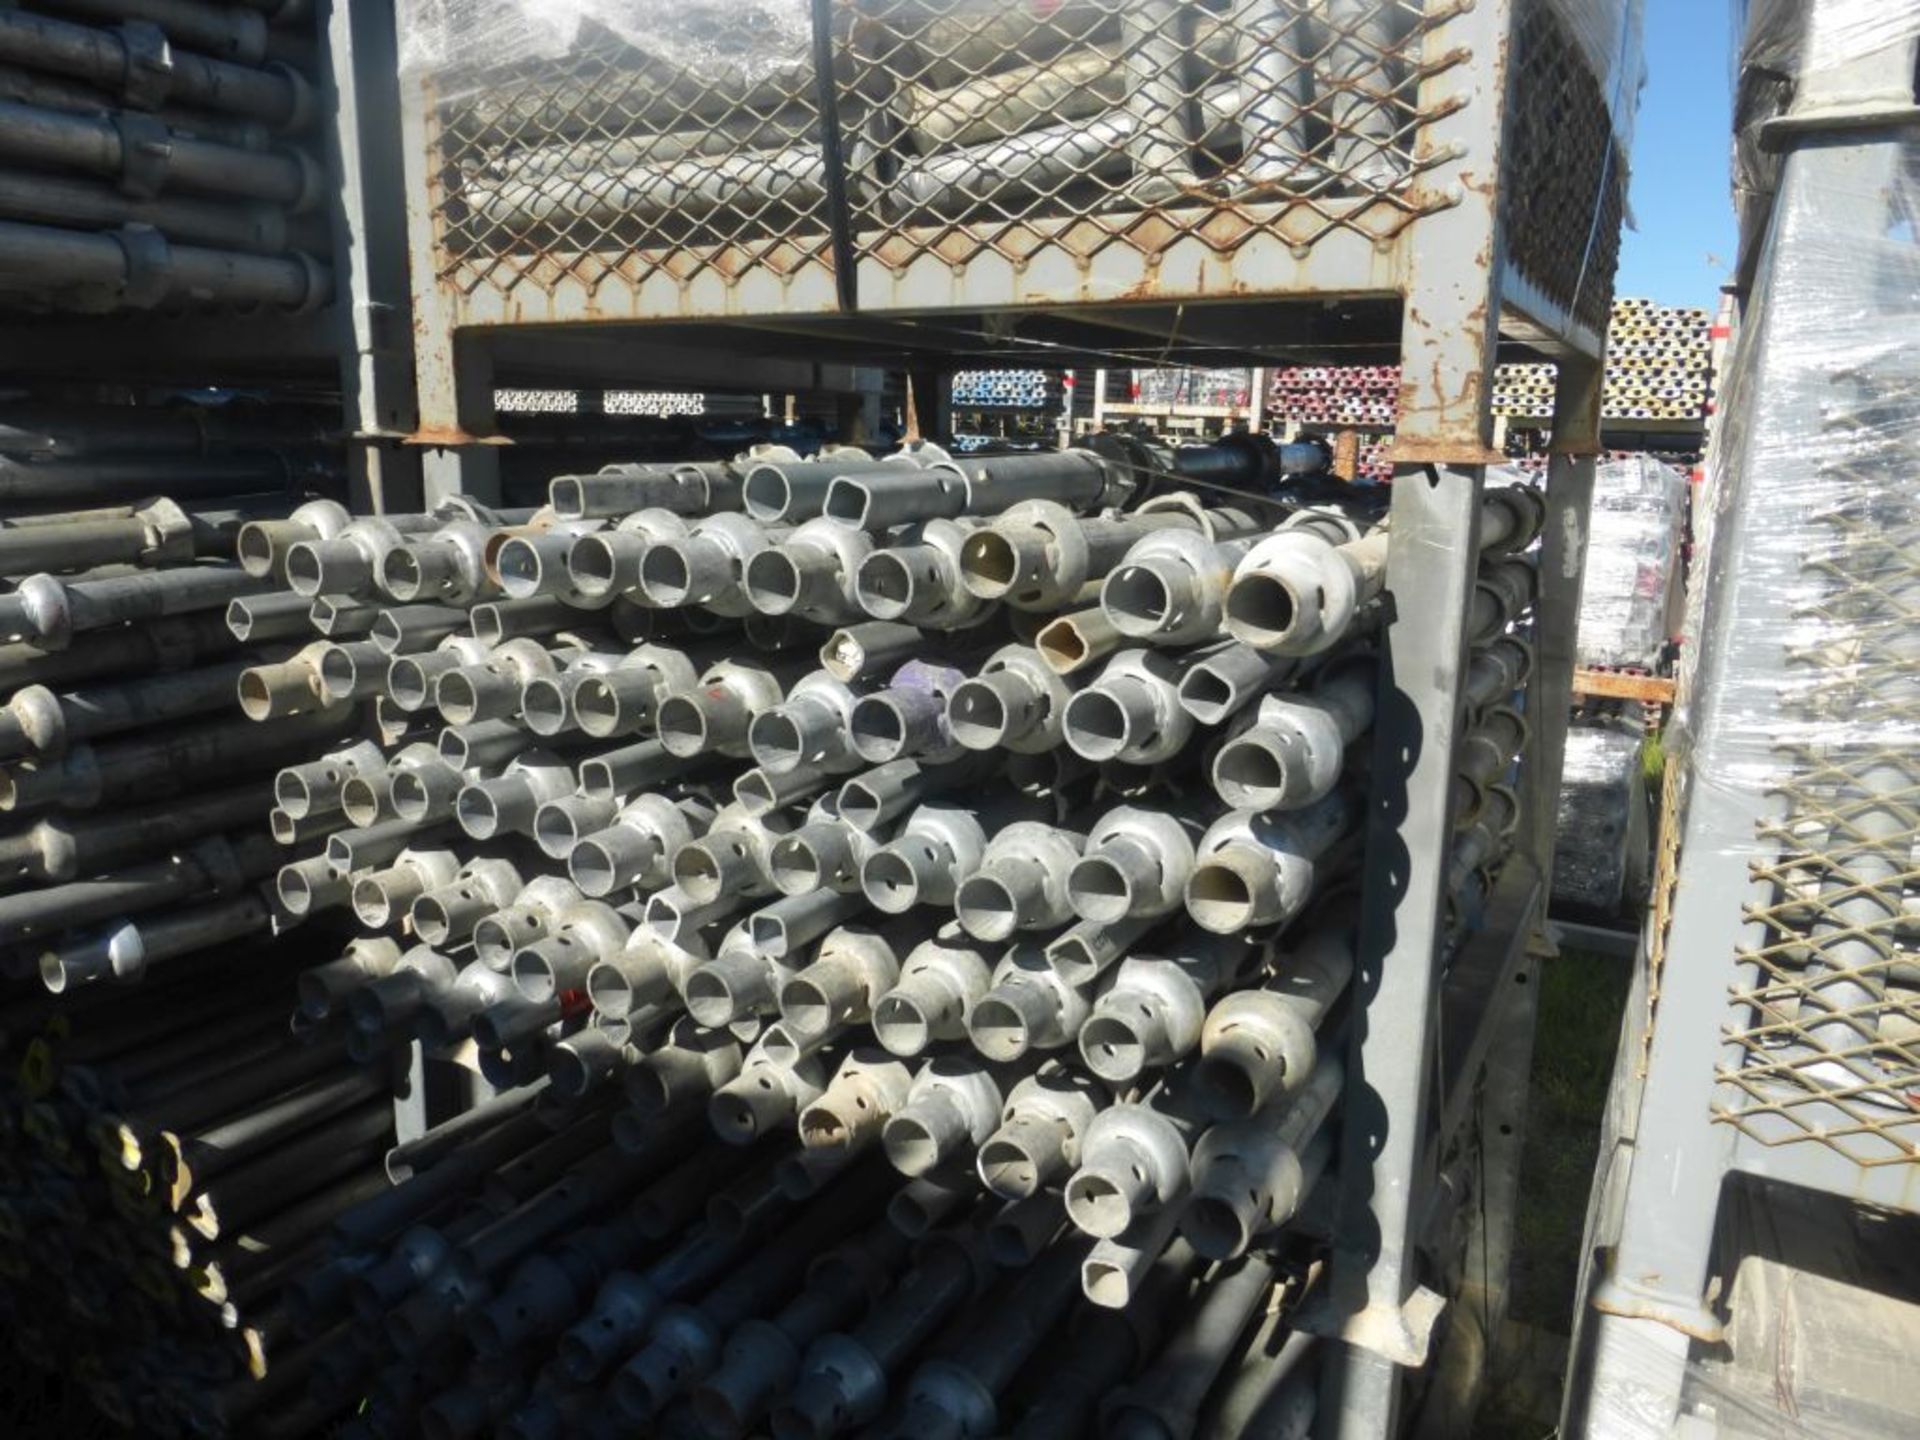 Lot of (250) 4' 11" (1.5M) Vertical 3 Cup; Type: CLV411 - (2) Racks Per Lot - Approximate Weight: - Image 2 of 11